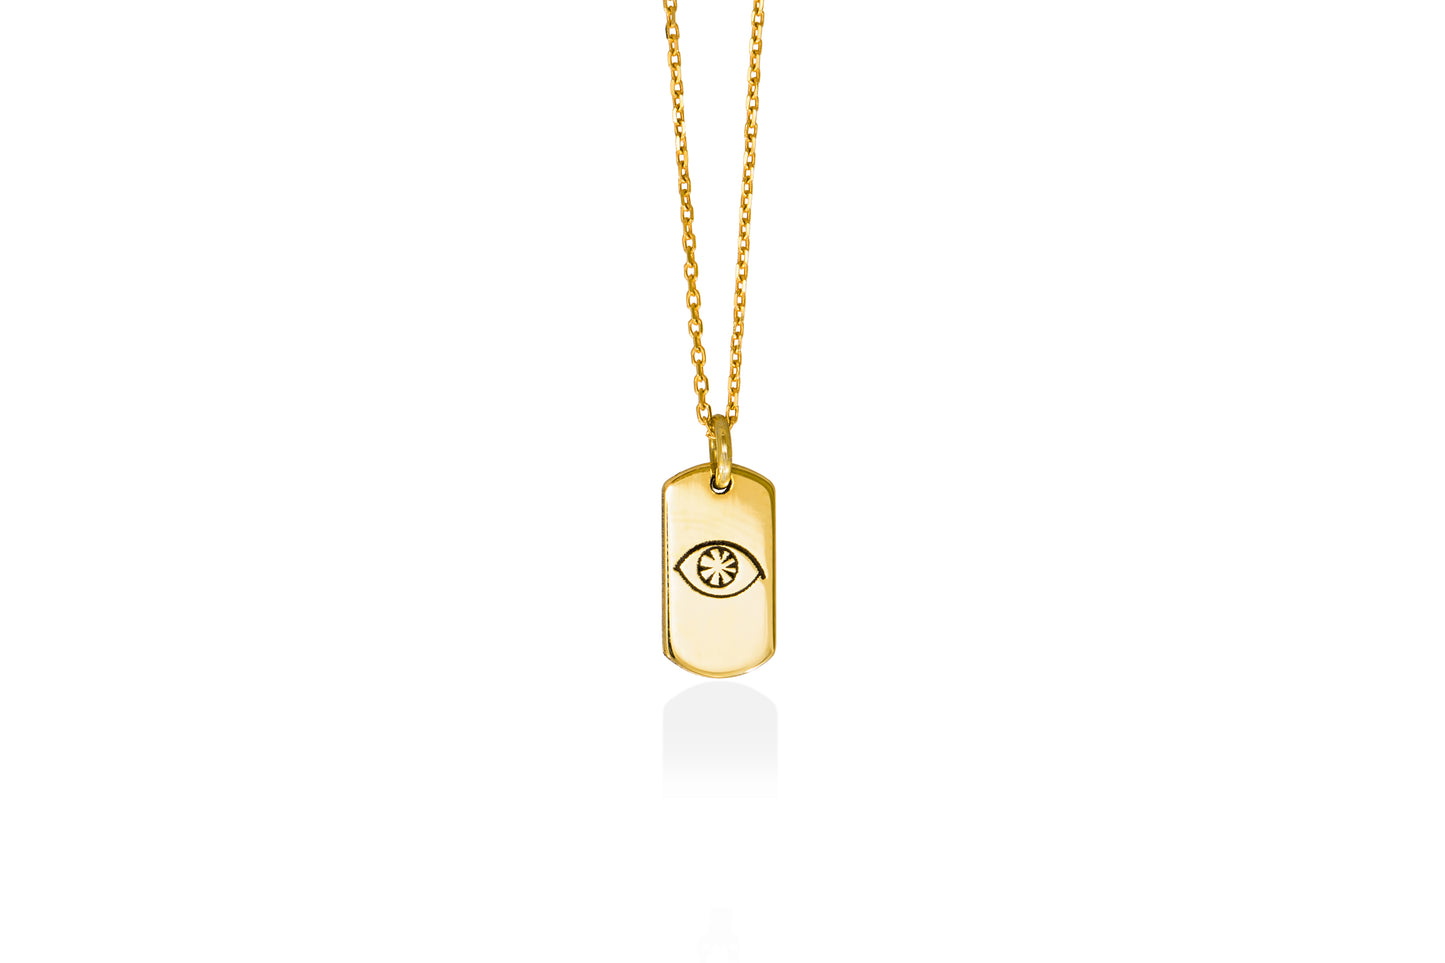 EYE tiny tag goldplated silver pendant